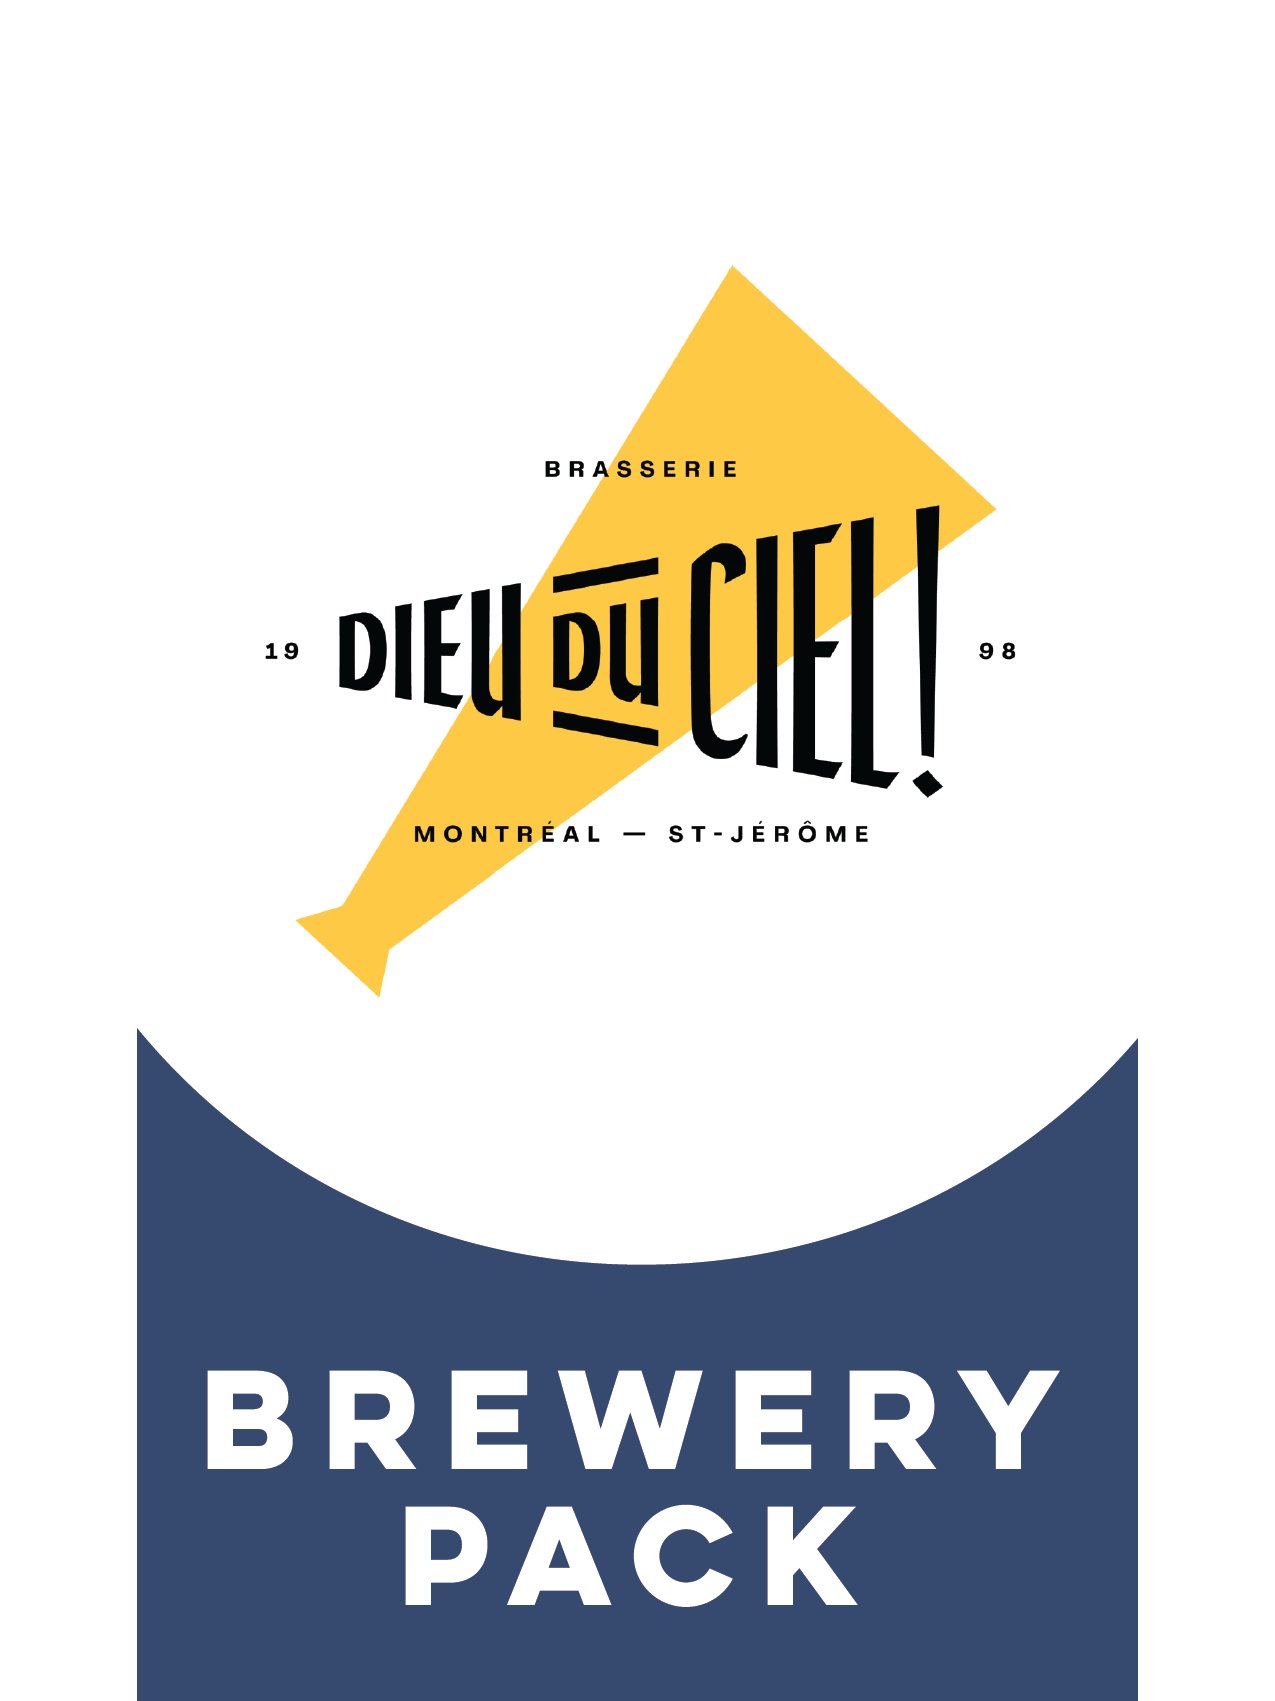 -Dieu du Ciel- Dieu du Ciel Brewery Pack-Packs & Cases- Only @ Beer Republic - The best online beer store for American & Canadian craft beer - Buy beer online from the USA and Canada - Bier online kopen - Amerikaans bier kopen - Craft beer store - Craft beer kopen - Amerikanisch bier kaufen - Bier online kaufen - Acheter biere online - IPA - Stout - Porter - New England IPA - Hazy IPA - Imperial Stout - Barrel Aged - Barrel Aged Imperial Stout - Brown - Dark beer - Blond - Blonde - Pilsner - Lager - Wheat -